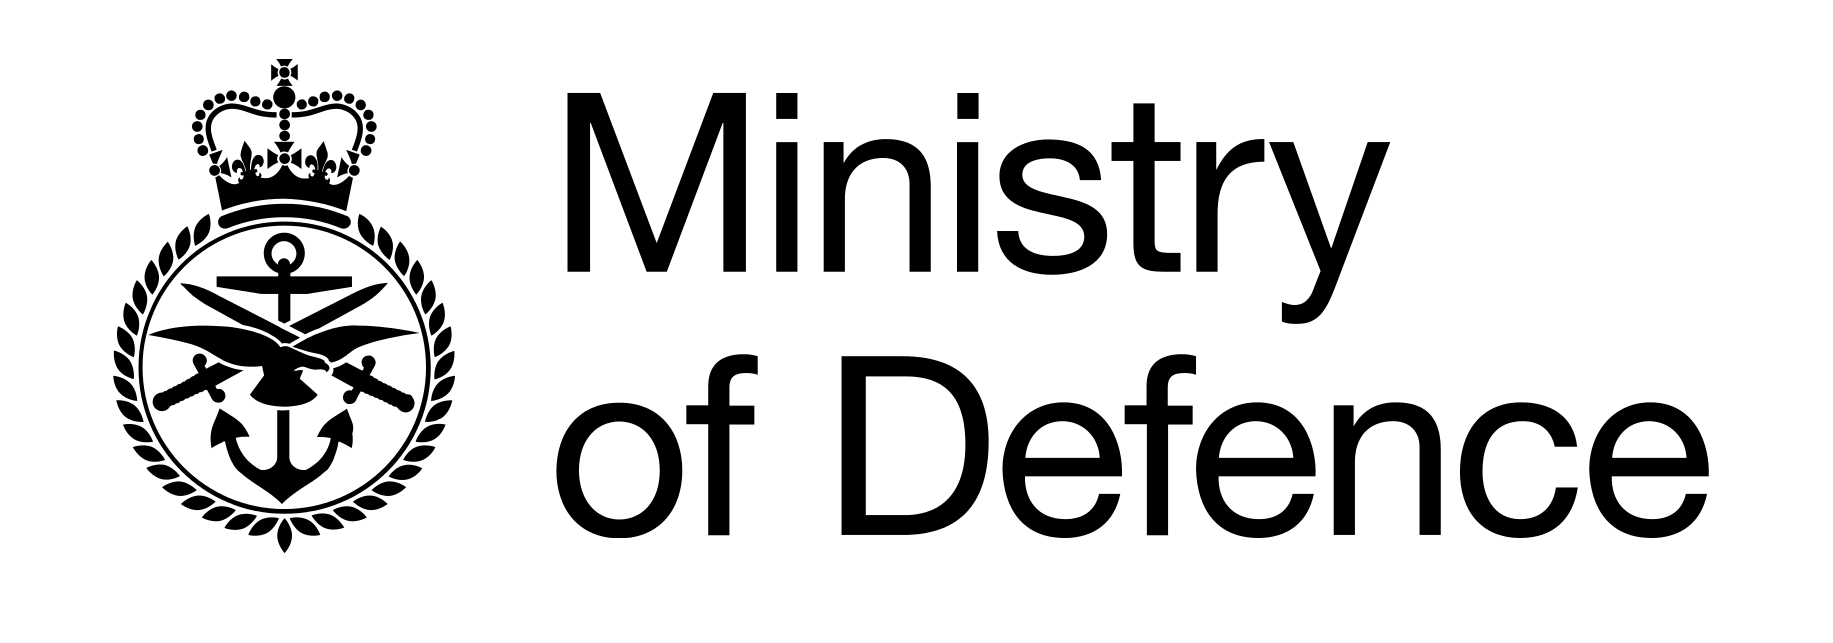 The-Ministry-Of-Defence-logo